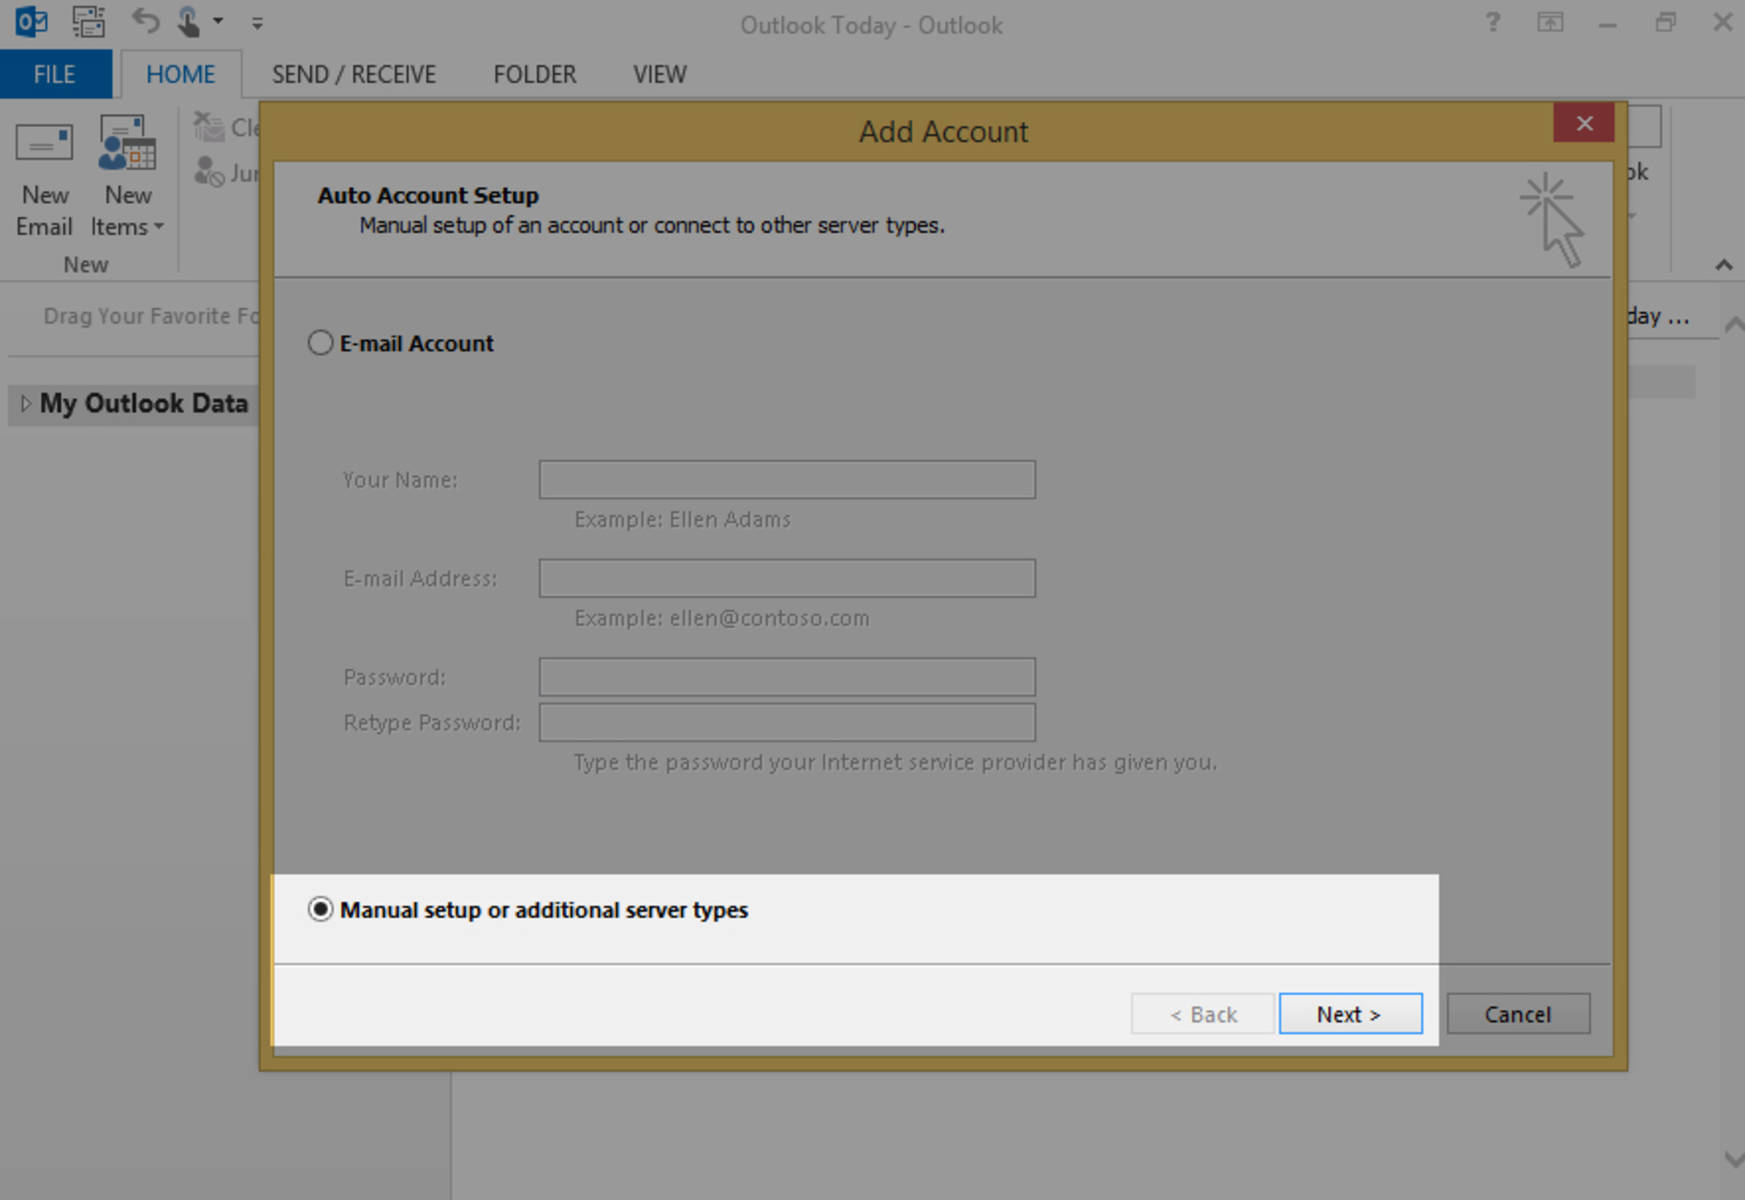 Step 2: Select "Manual setup or additional server types", then click Next.